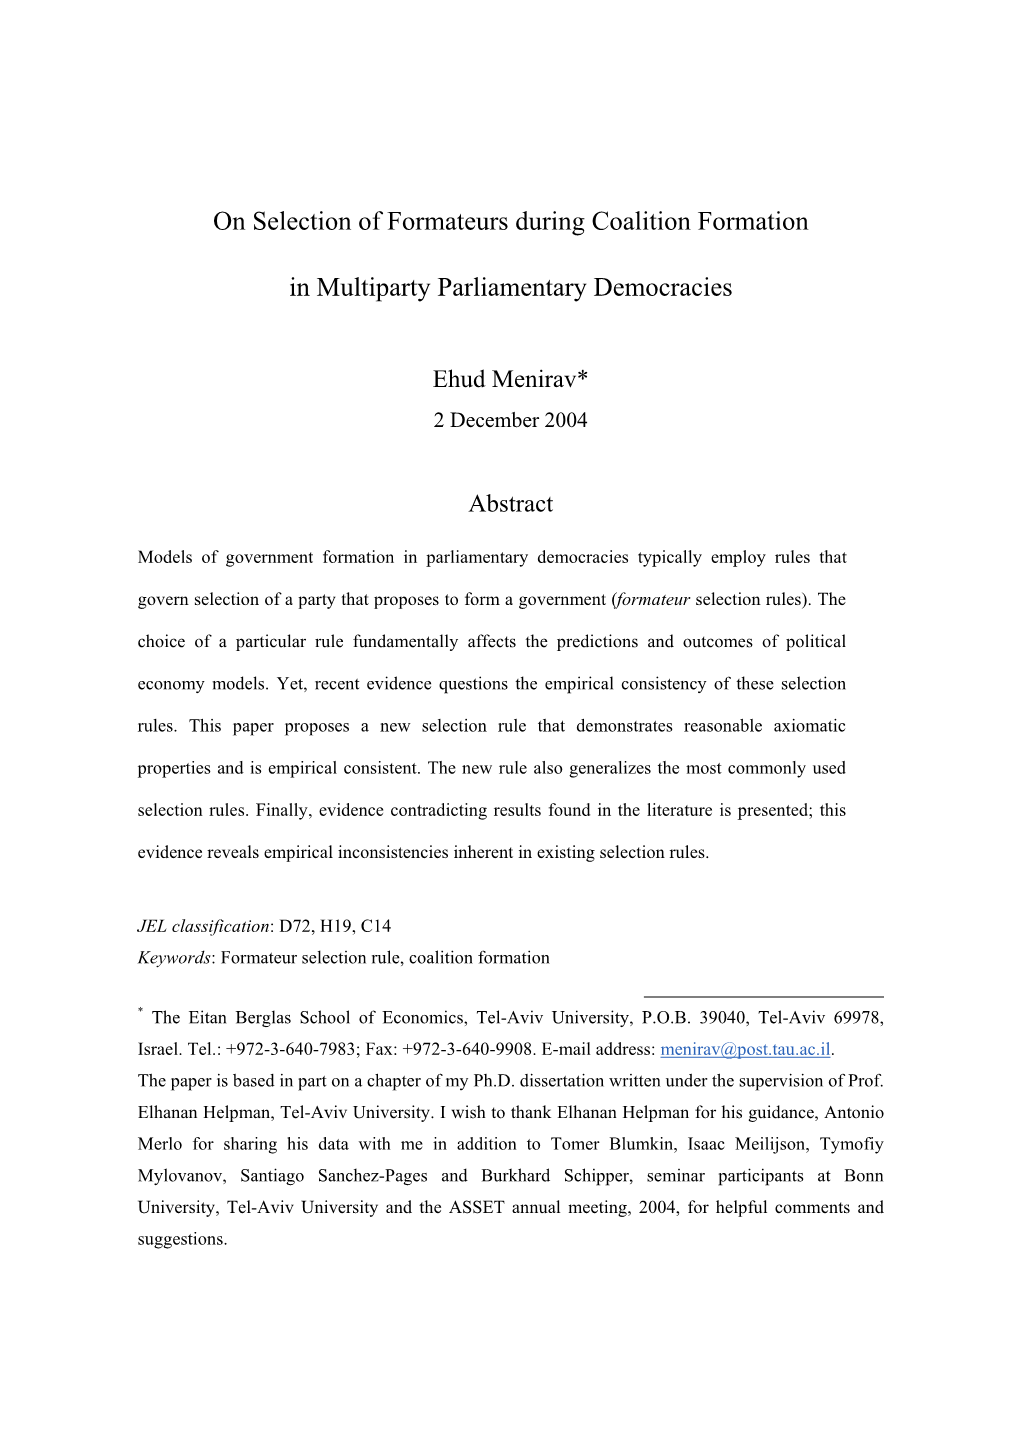 On Selection of Formateurs During Coalition Formation in Multiparty Parliamentary Democracies